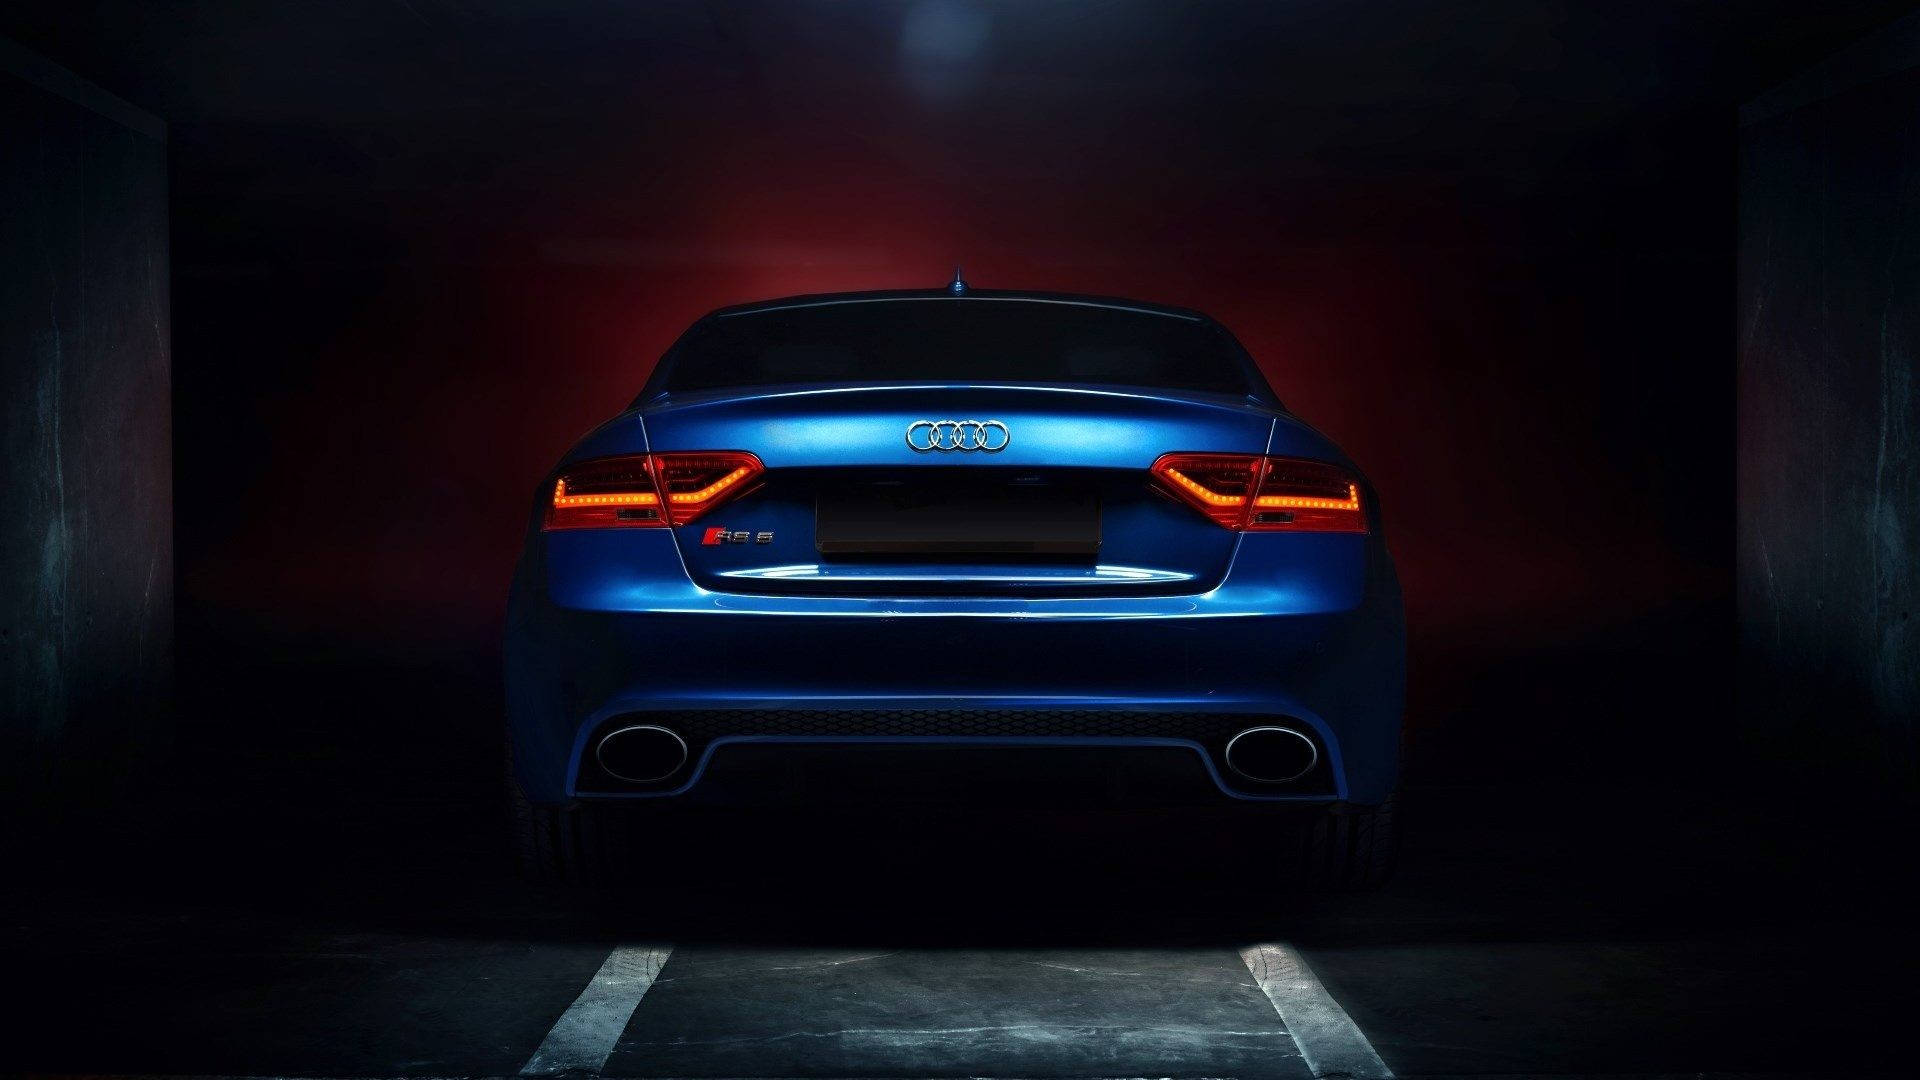 2013 Audi Rs 5 Background